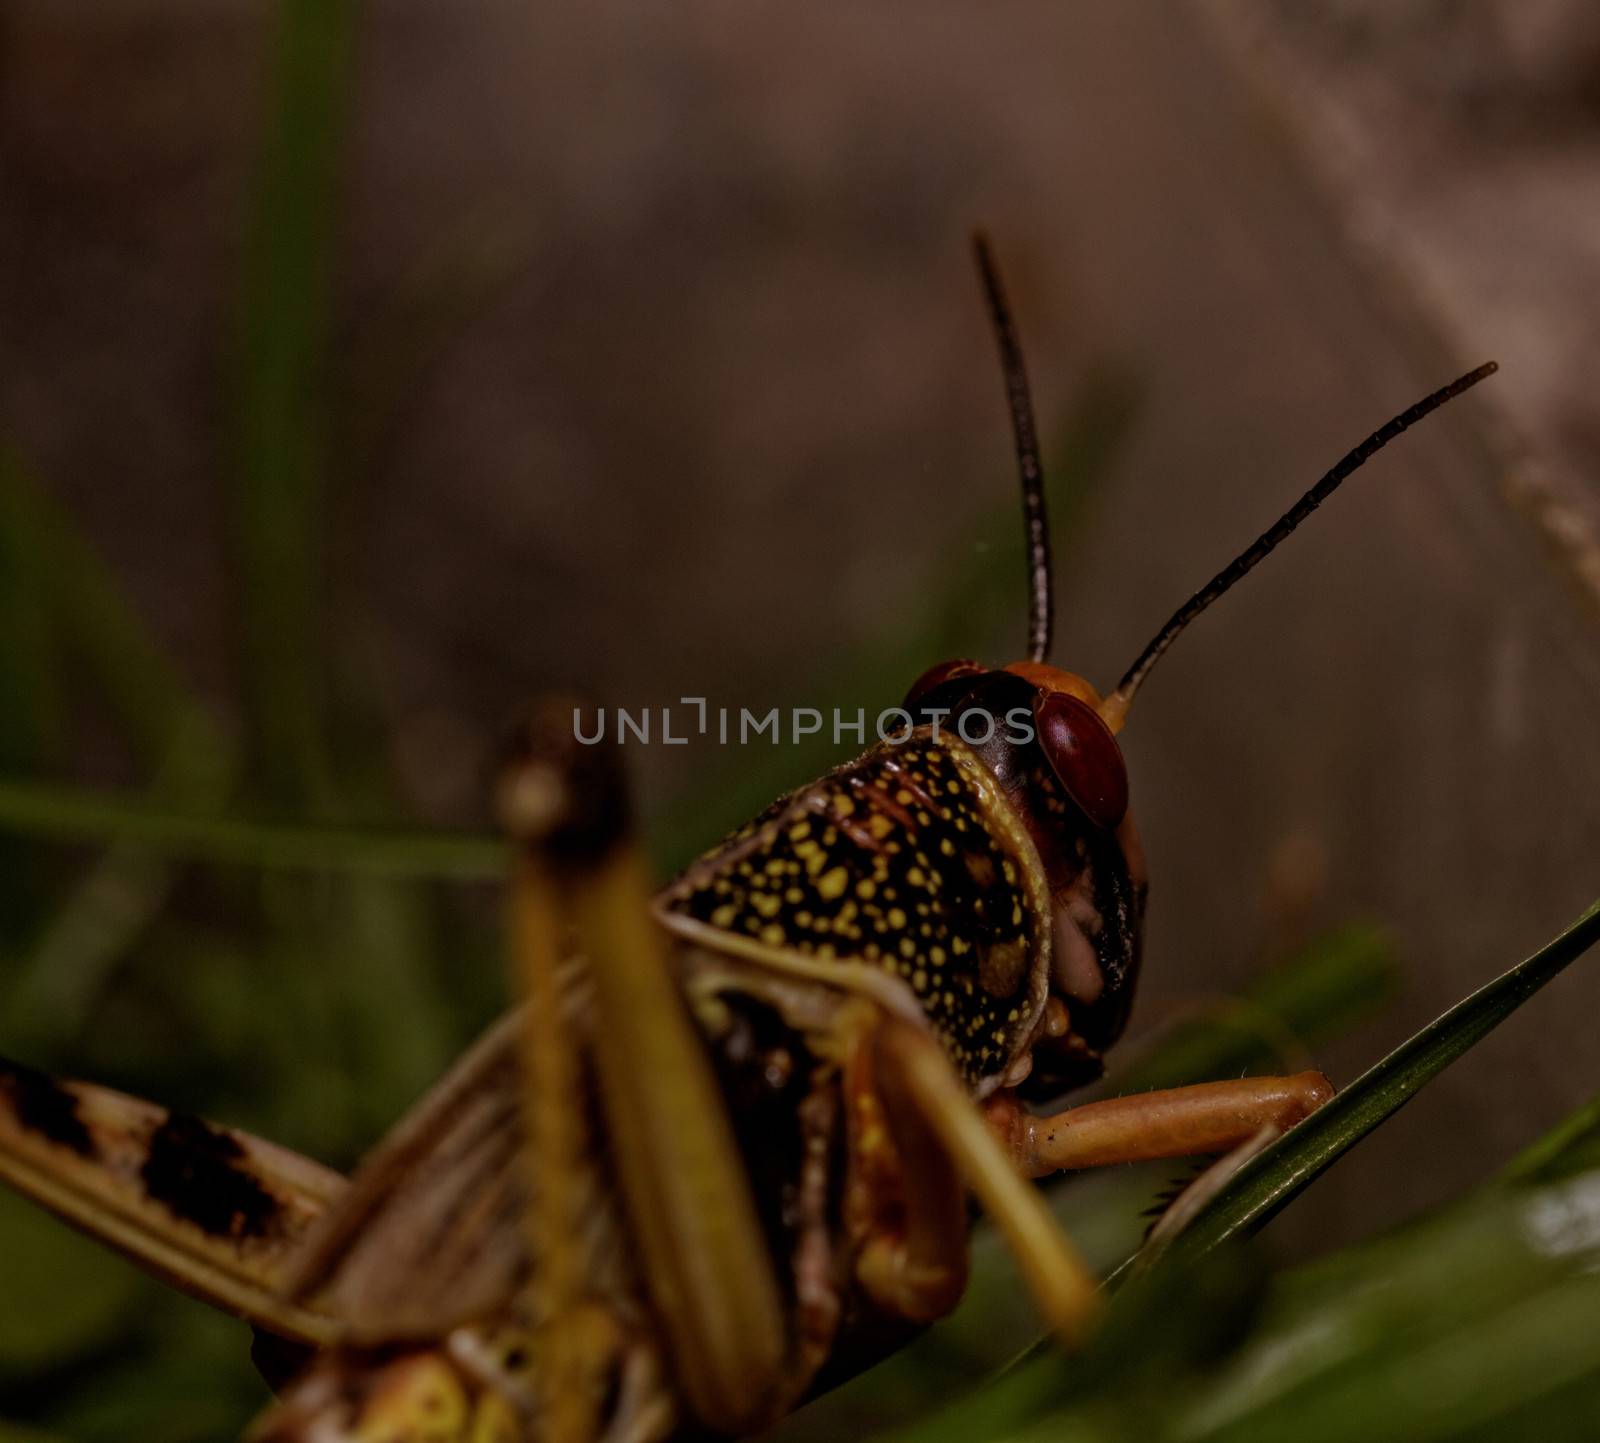 one locust eating the grass in the nature